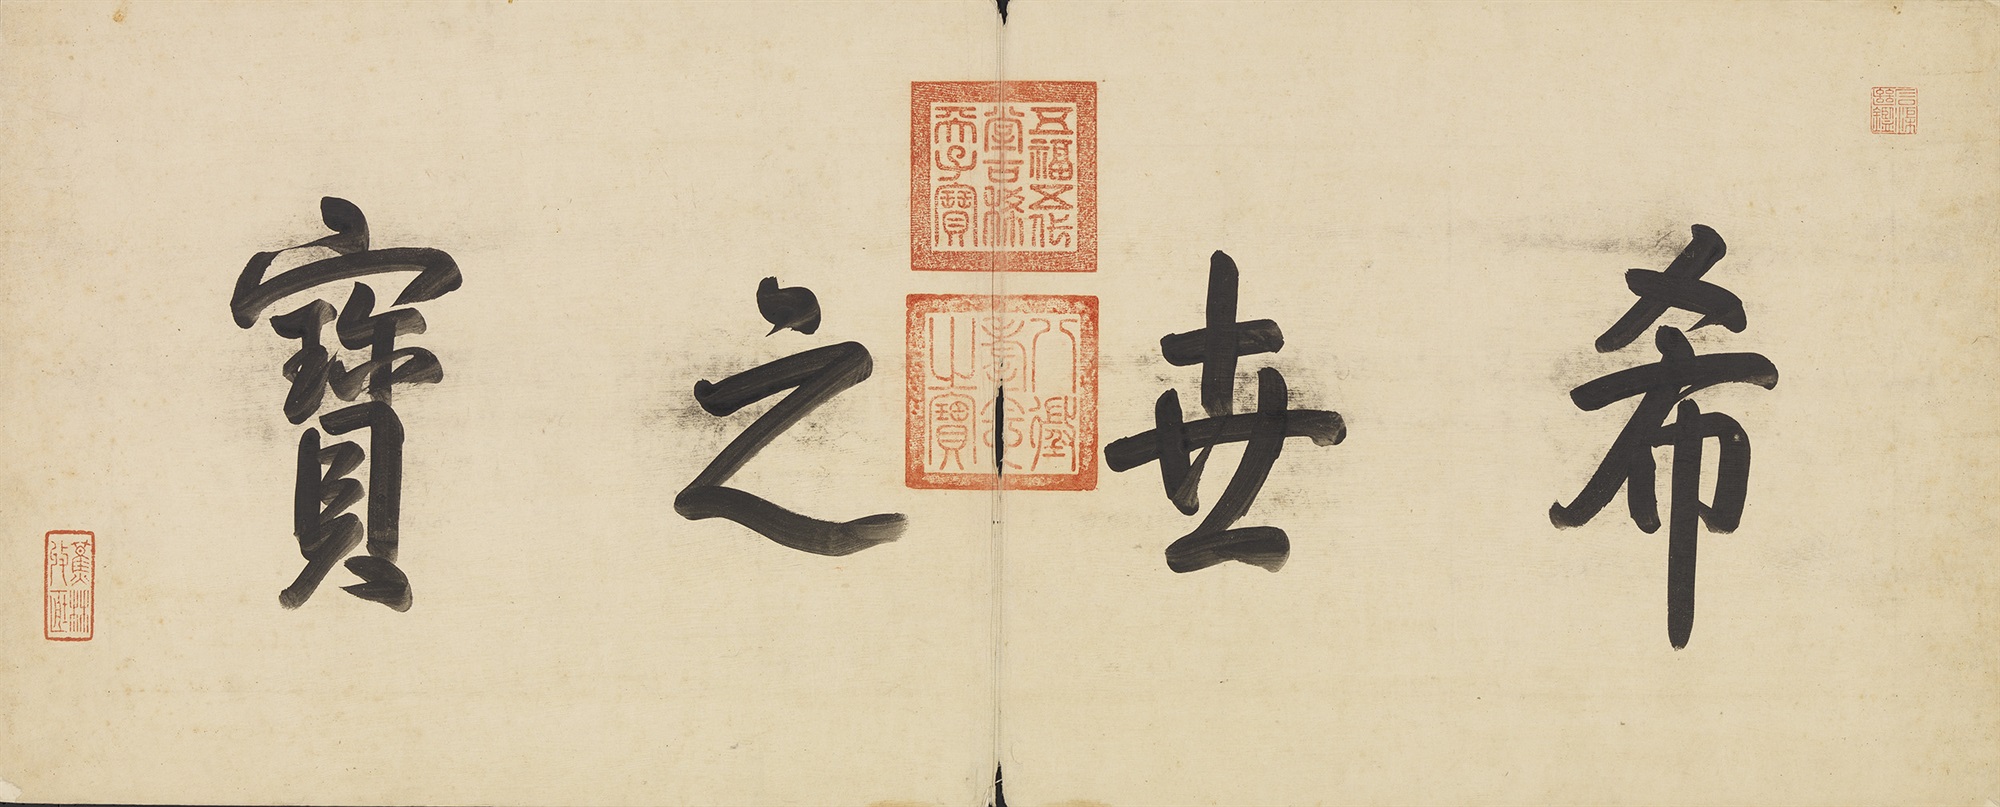 Calligraphic “Tang Rhyming Dictionary”, Wu Cailuan, Tang dynastypreview